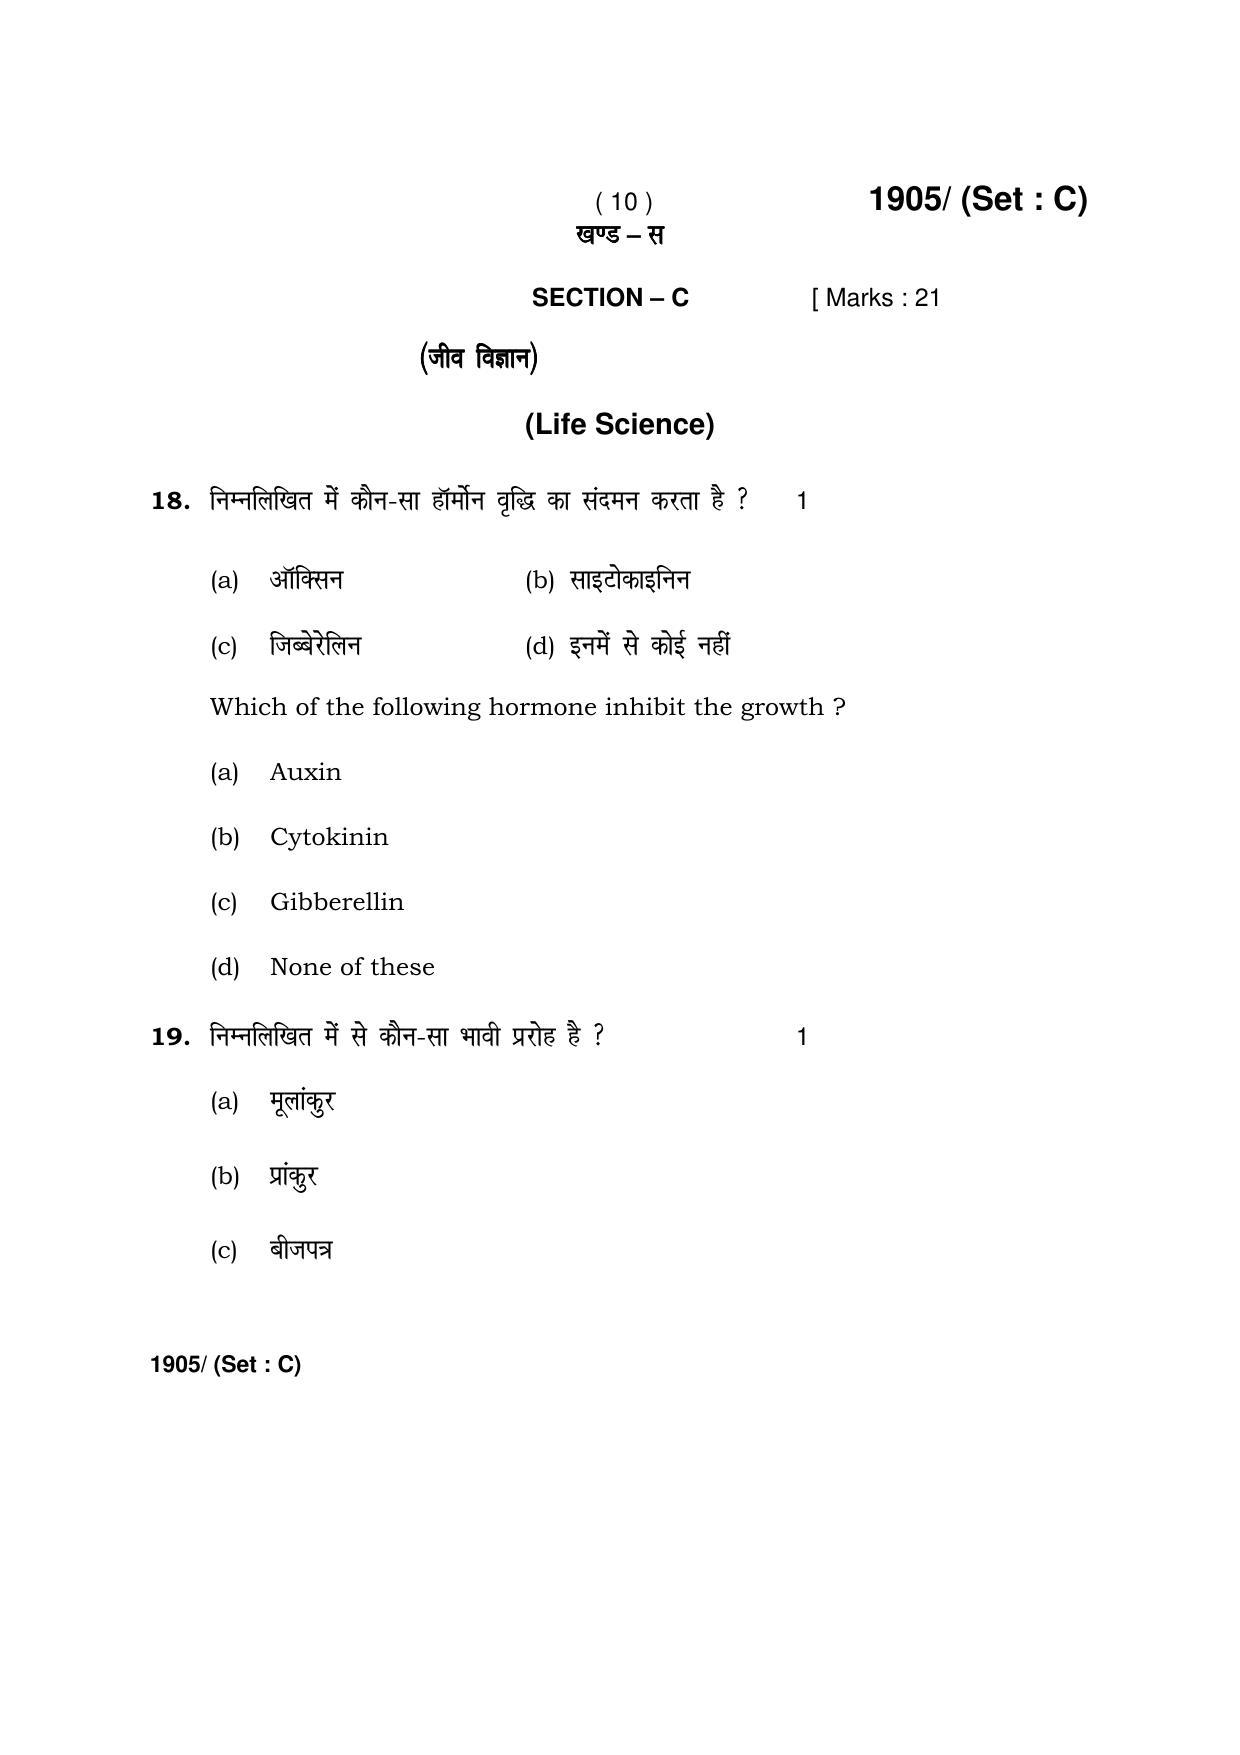 Haryana Board HBSE Class 10 Science -C 2017 Question Paper - Page 10